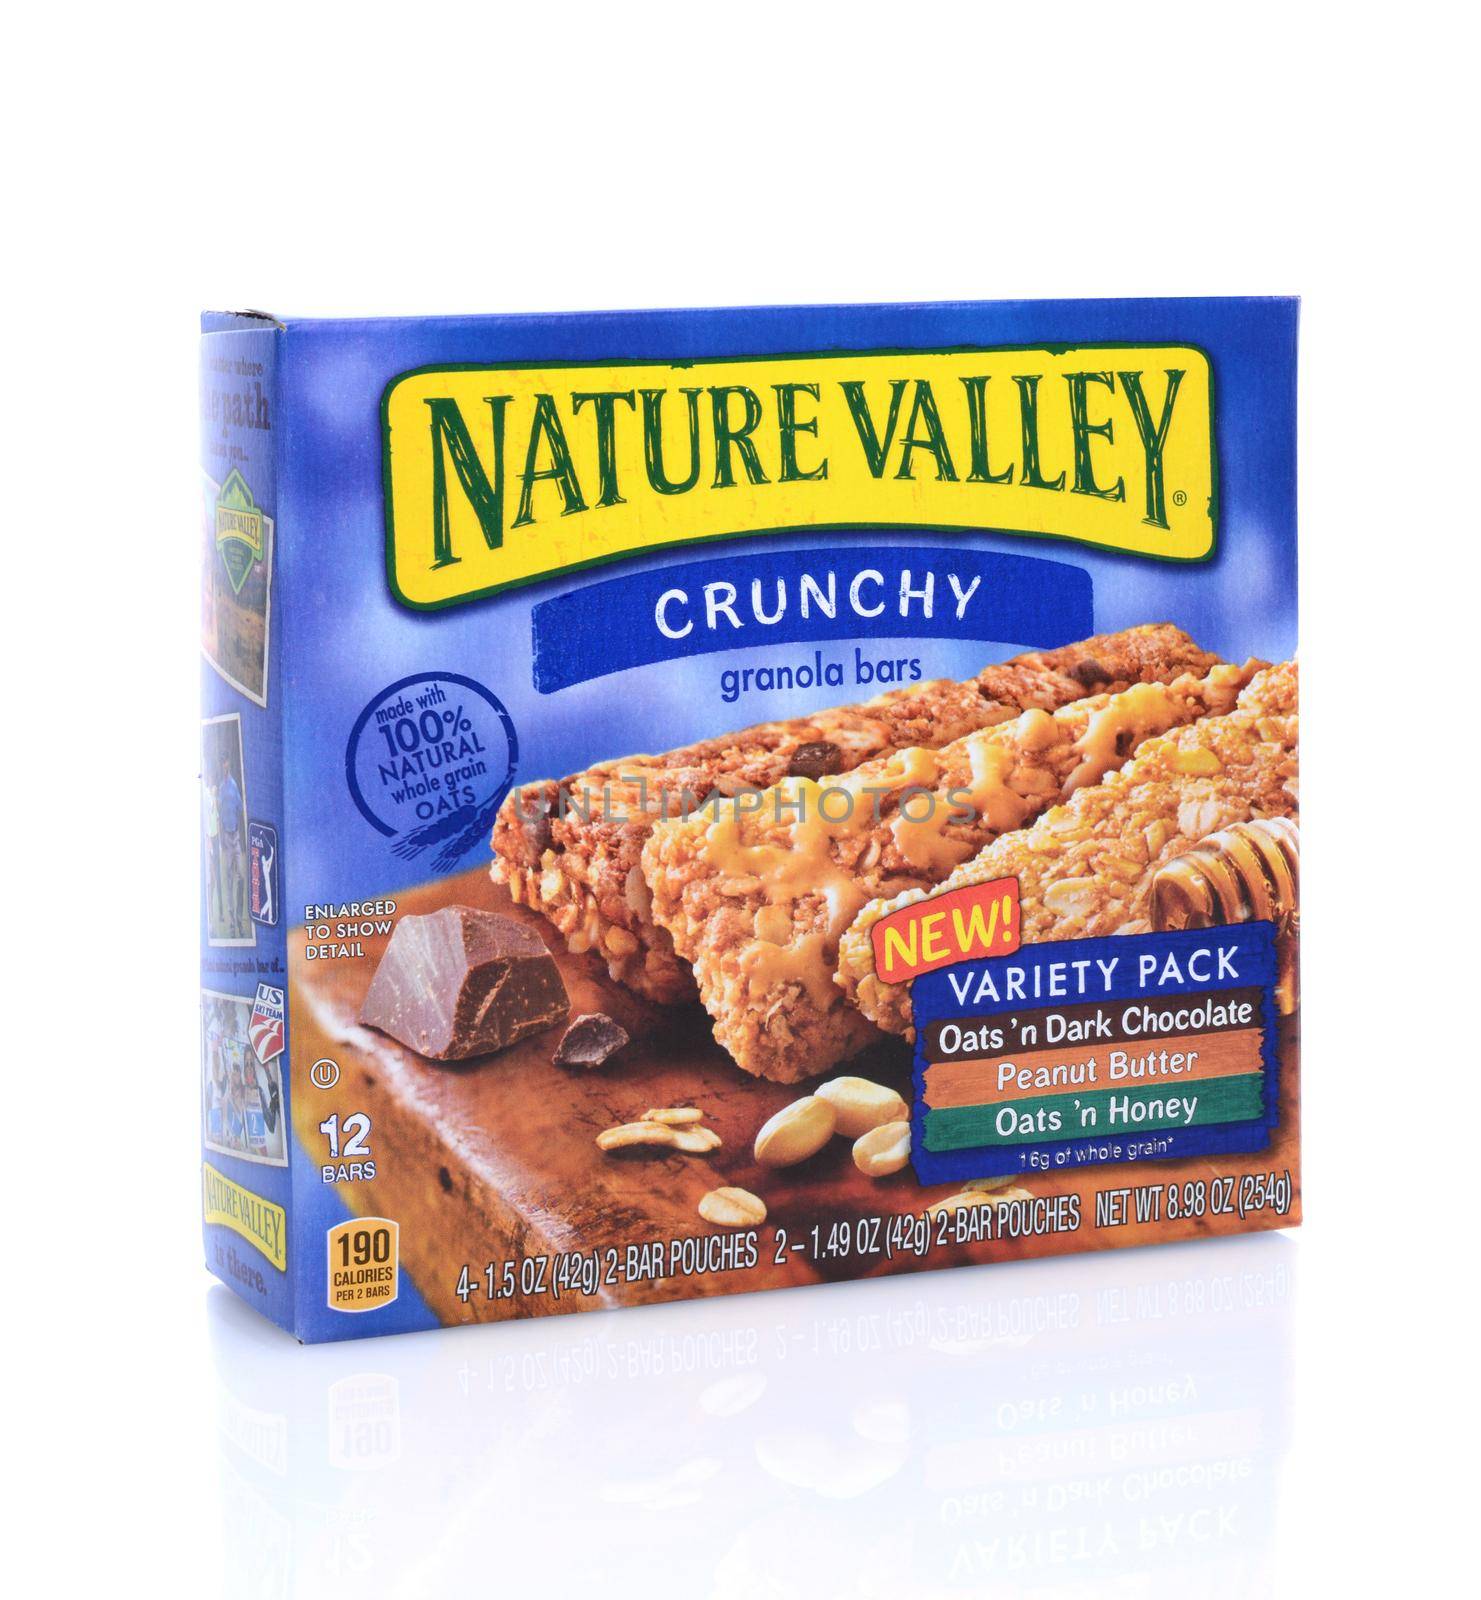 IRVINE, CA - May 14, 2014: A 12 count box of Nature Valley Granola Bars. A product of General Mills headquartered in the Minneapolis suburb of Golden Valley, Minnesota.